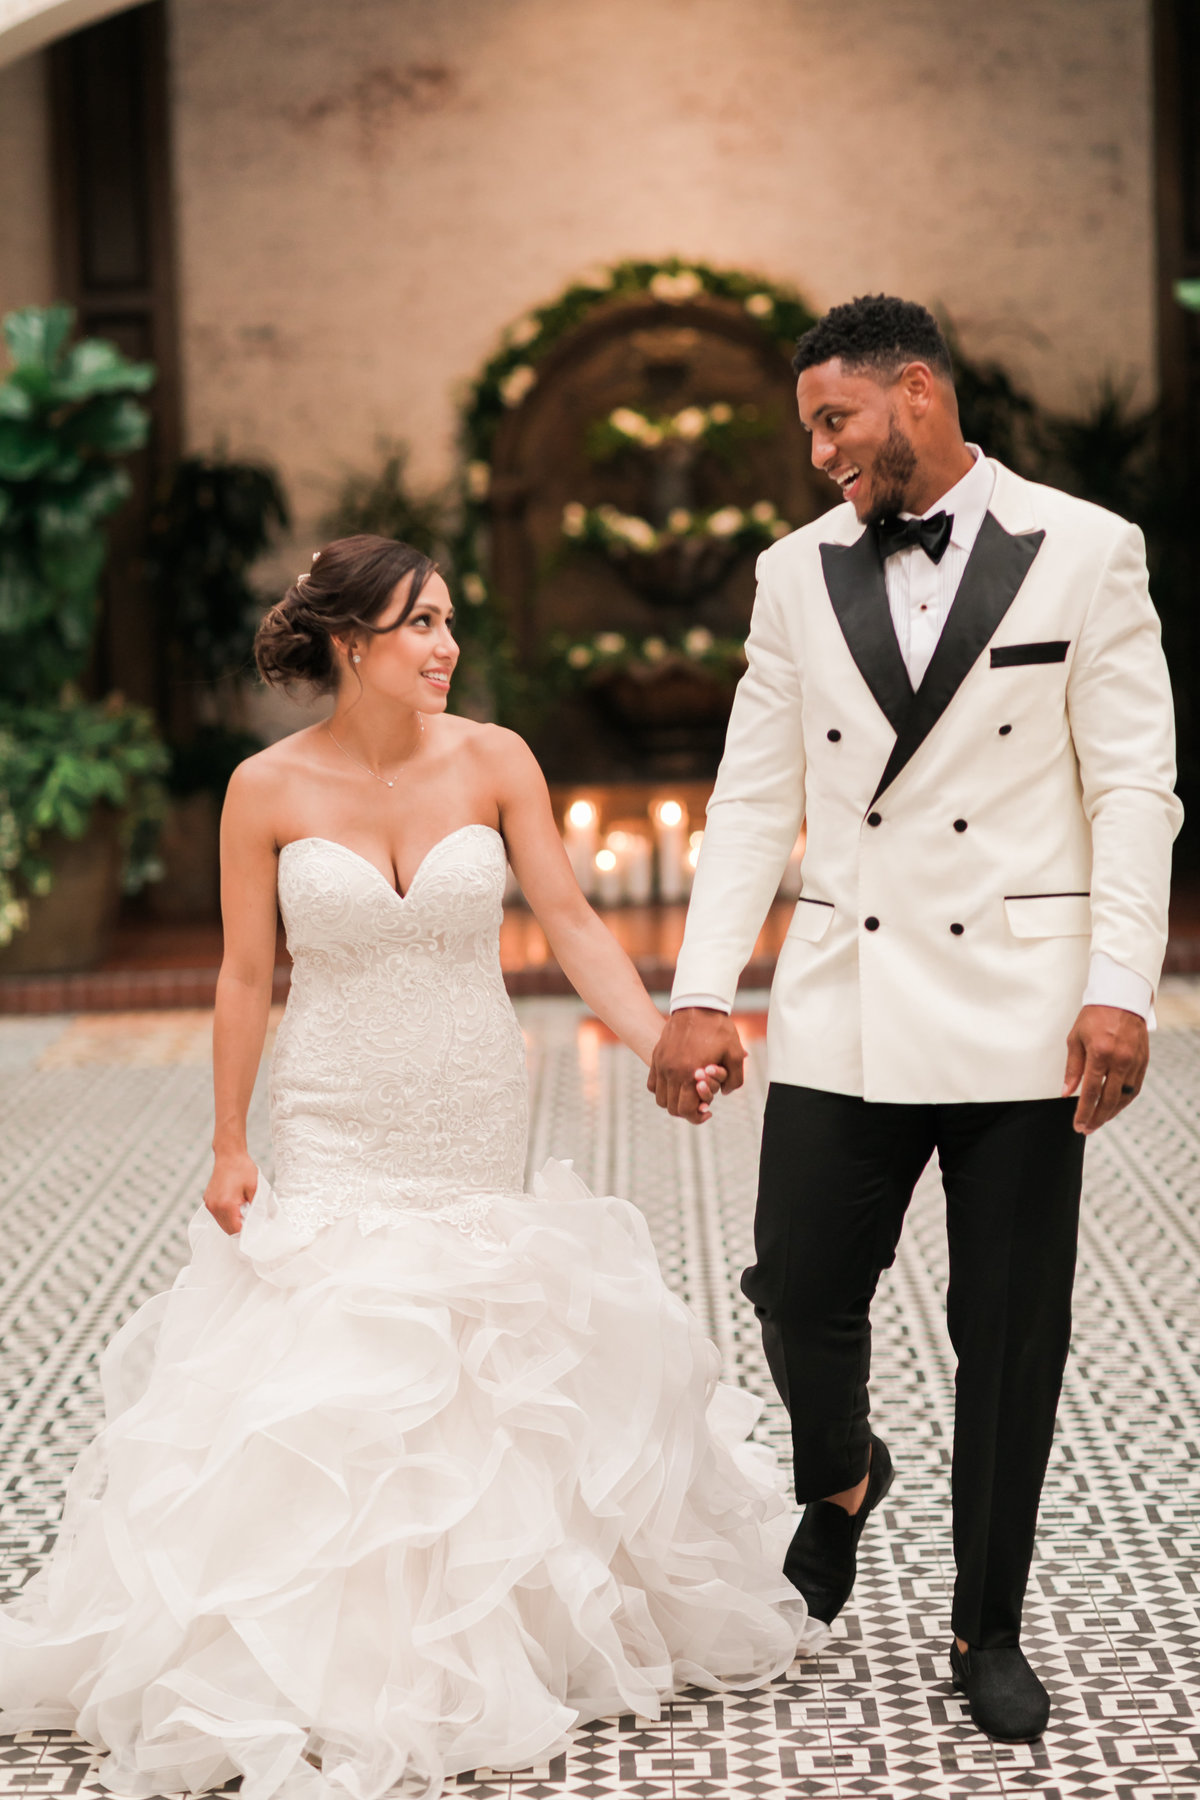 Ebell_Los_Angeles_Malcolm_Smith_NFL_Navy_Brass_Wedding_Valorie_Darling_Photography - 115 of 122